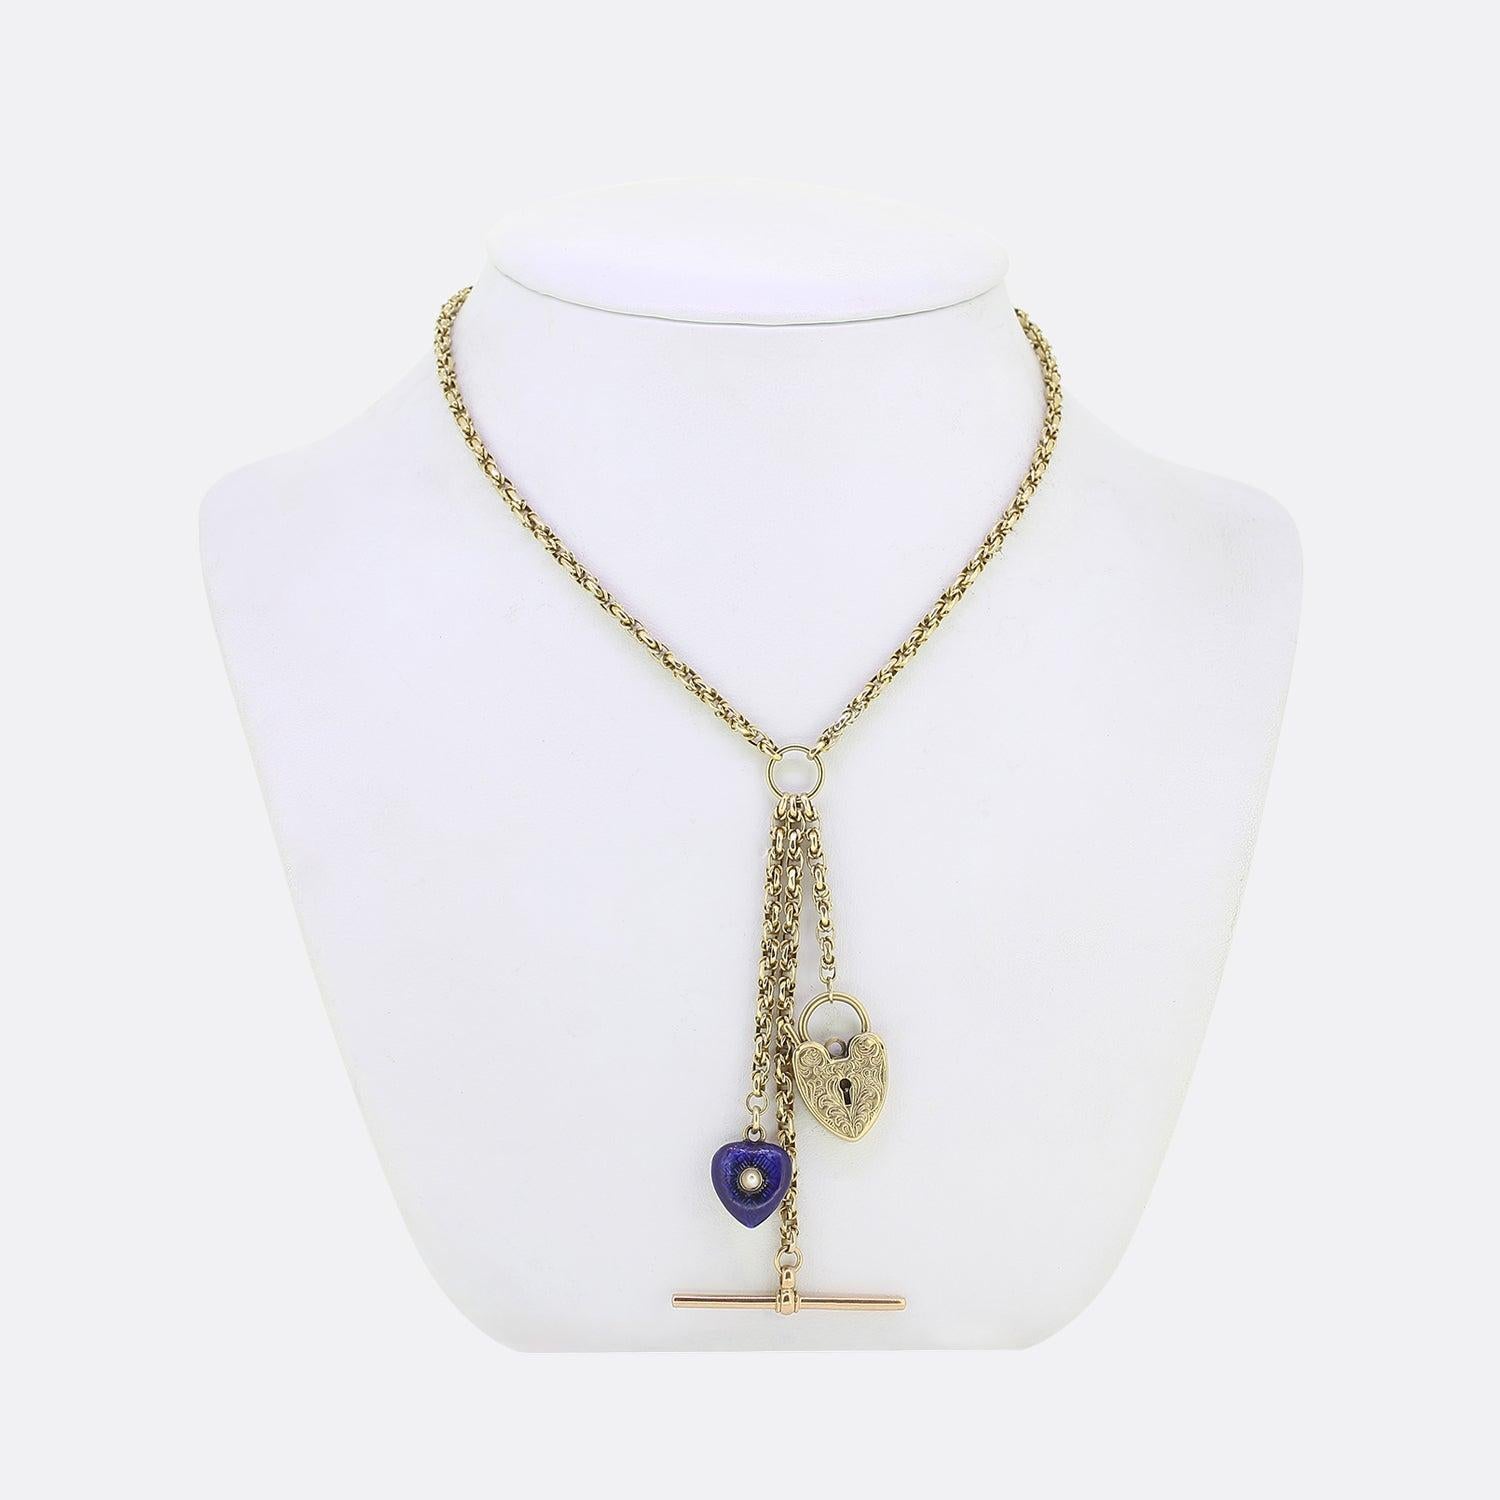 Here we have a vintage 9ct yellow gold belcher chain charm necklace. The chain itself is double linked and lightly rendered to showcase a faceted design. This lengthy chain plays host to a trio of pendants including an ornately engraved padlock, a